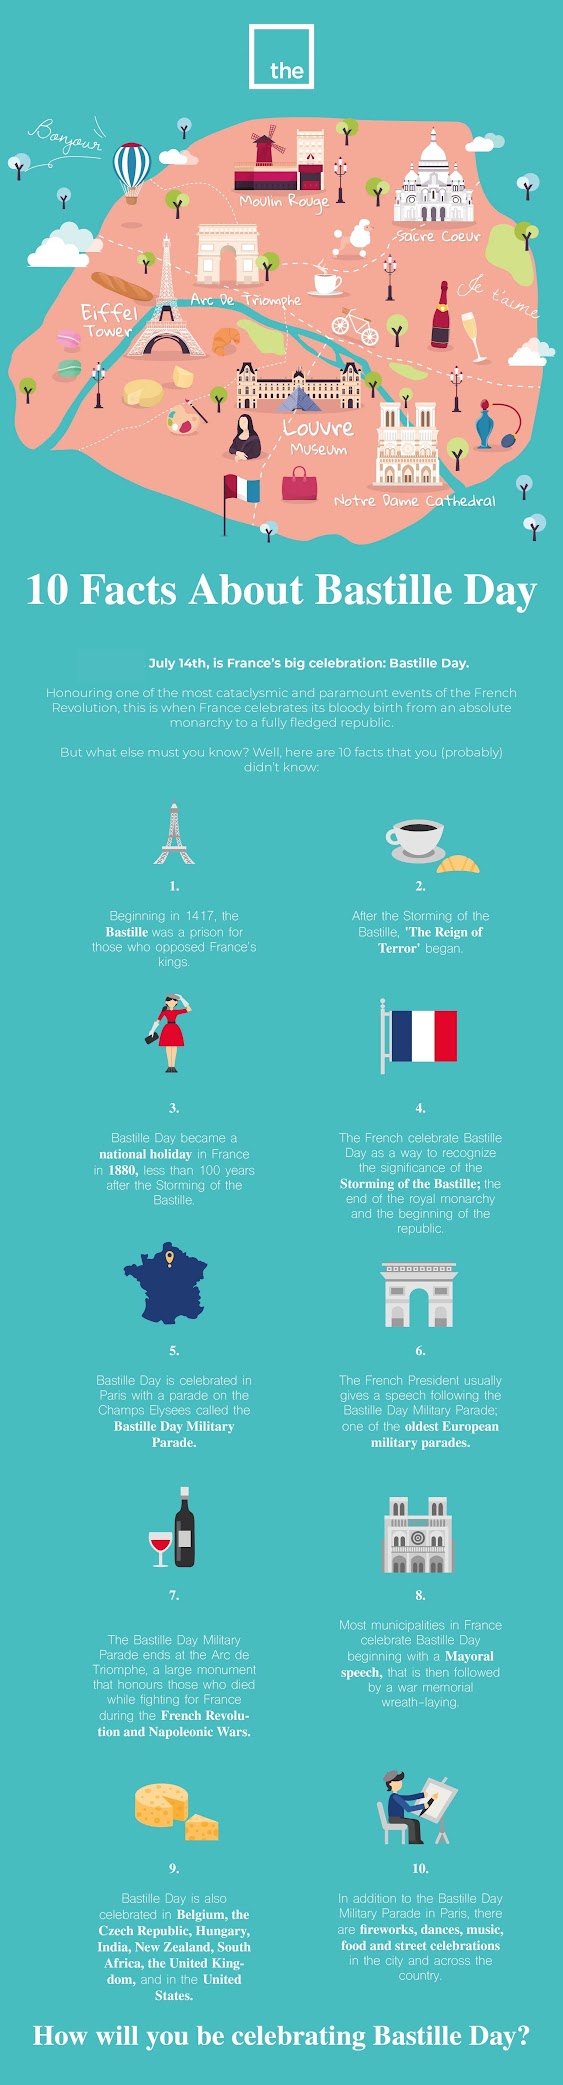 10 Facts About Bastille Day